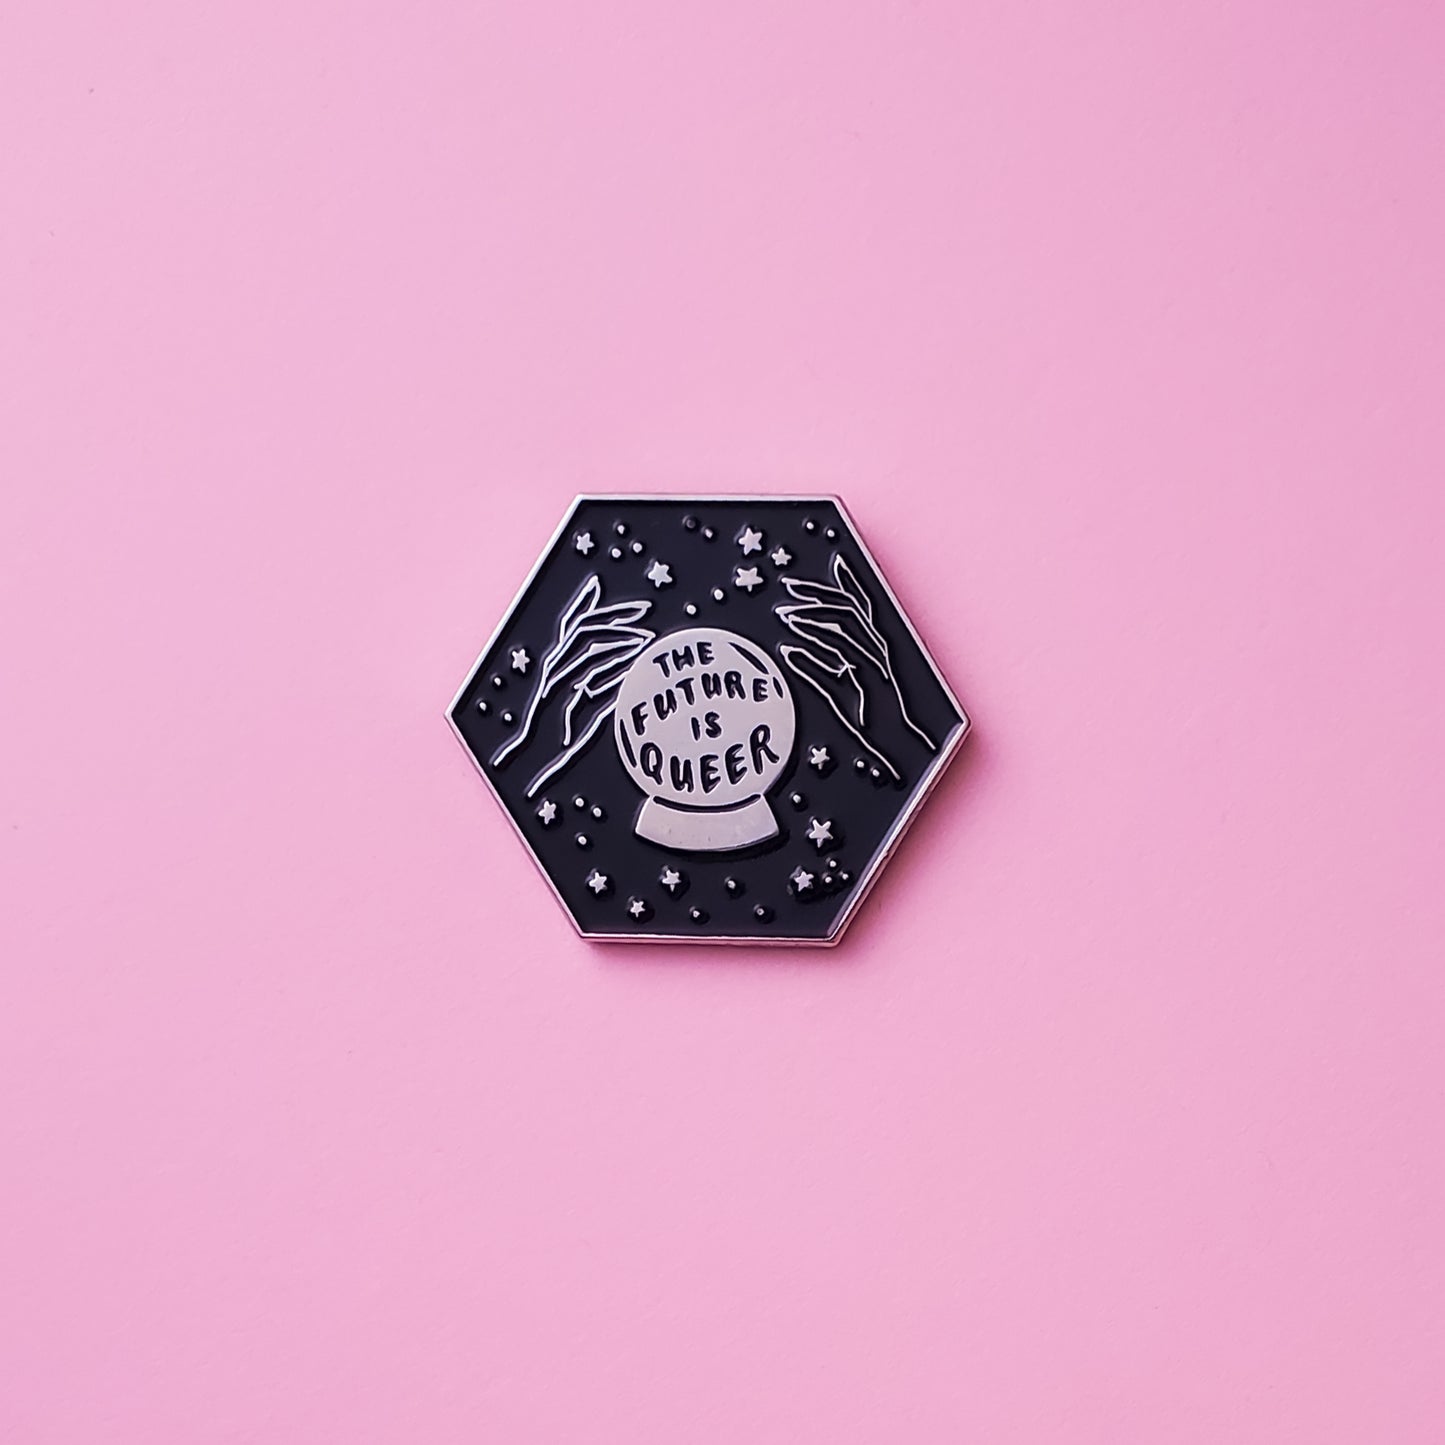 Hexagonal shaped pride pin on a pink background. This LGBTQ pin features two hands, stars, and a crystal ball that reads ' The Future is Queer' against black enamel. Future is Queer Pin For Sale - LGBTQ Accessories  | Little Rainbow Paper Co